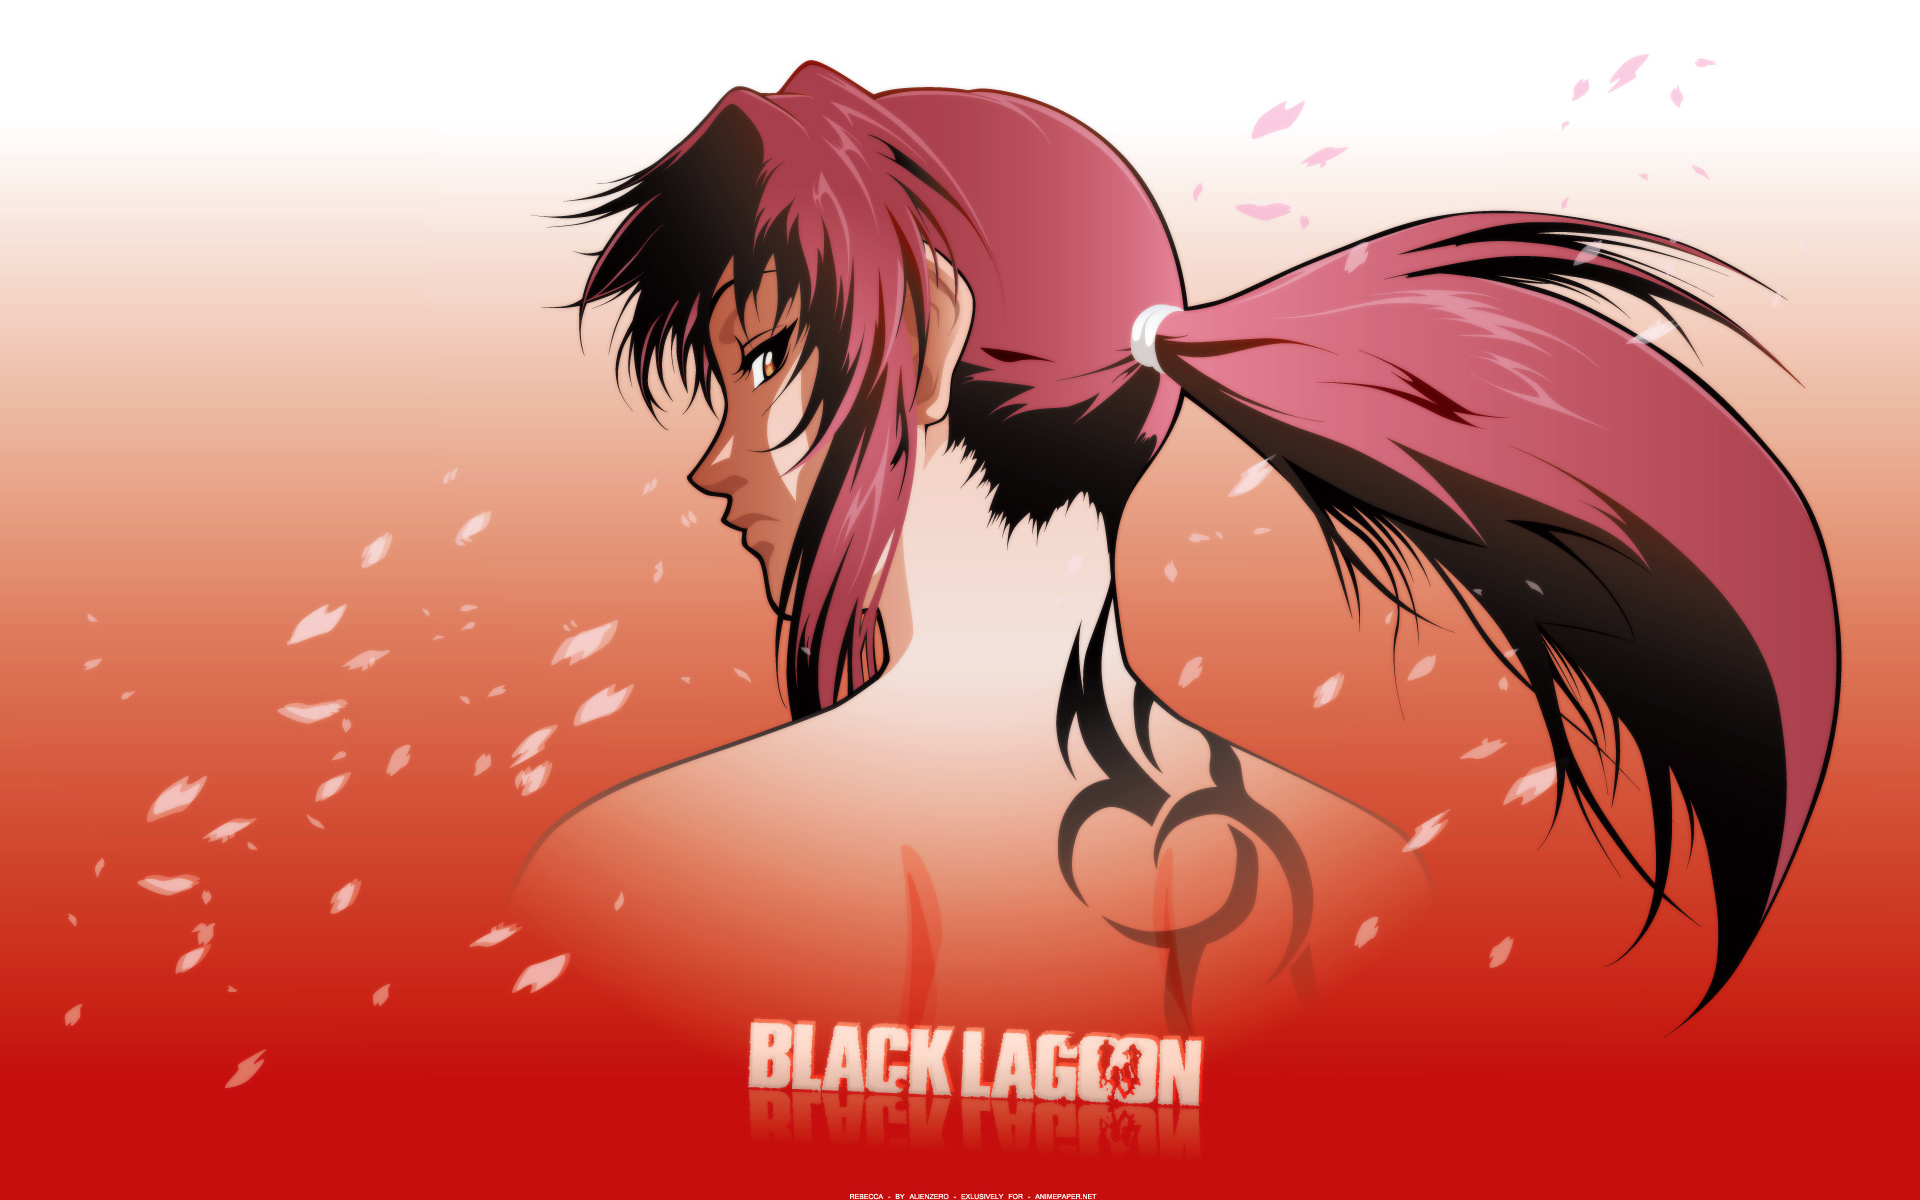 Anime character from Black Lagoon standing against a fiery background.